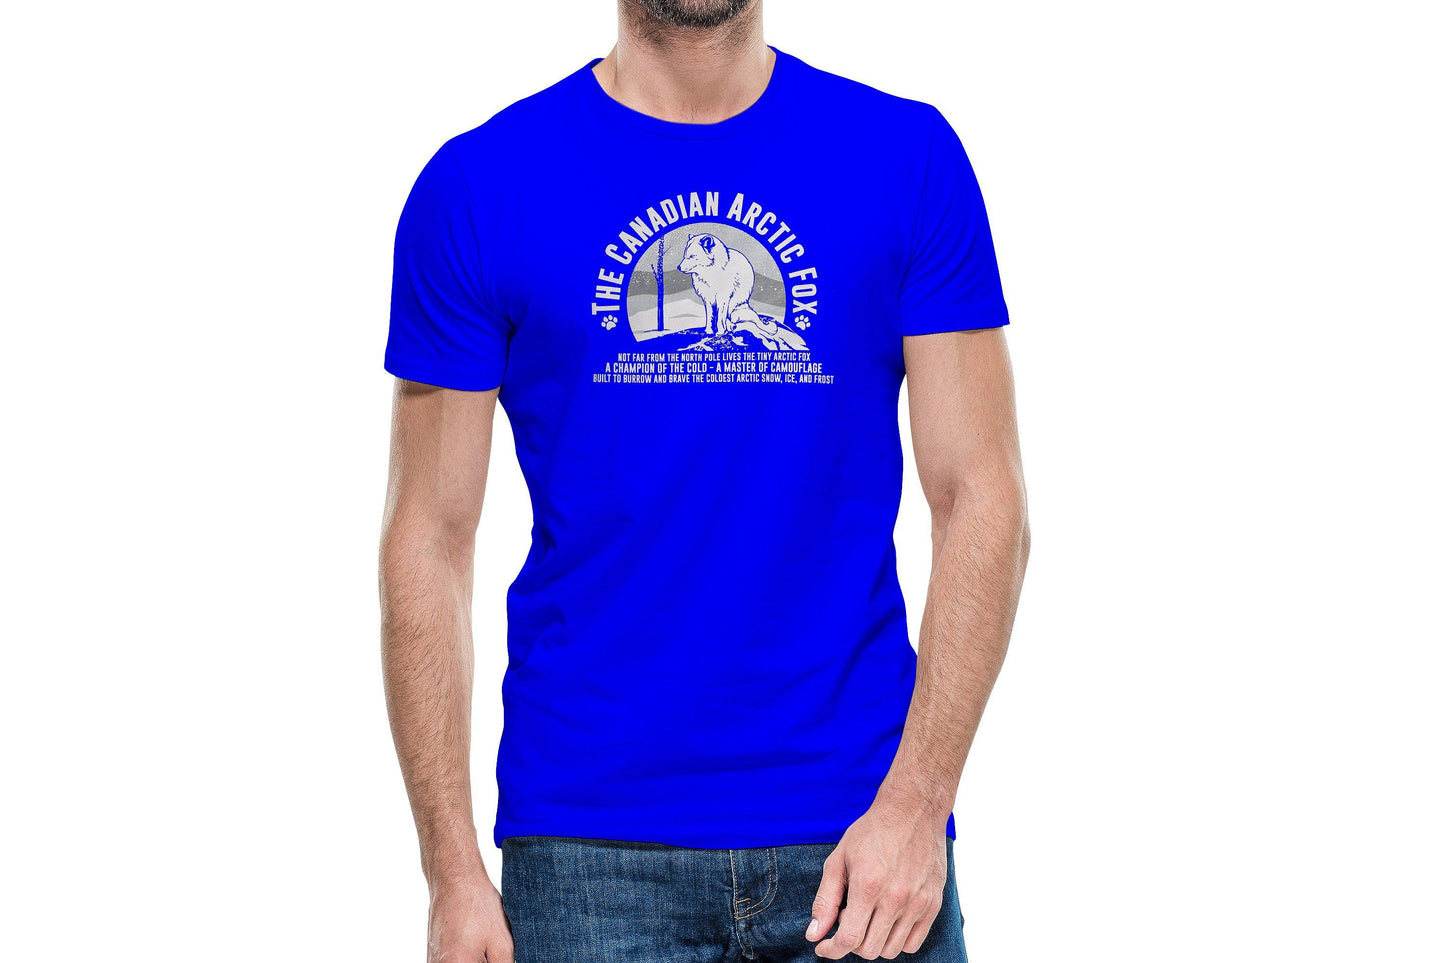 This is a blue tee depicting the Canadian arctic fox. It has an artist's rendering of the animal followed by facts about it.